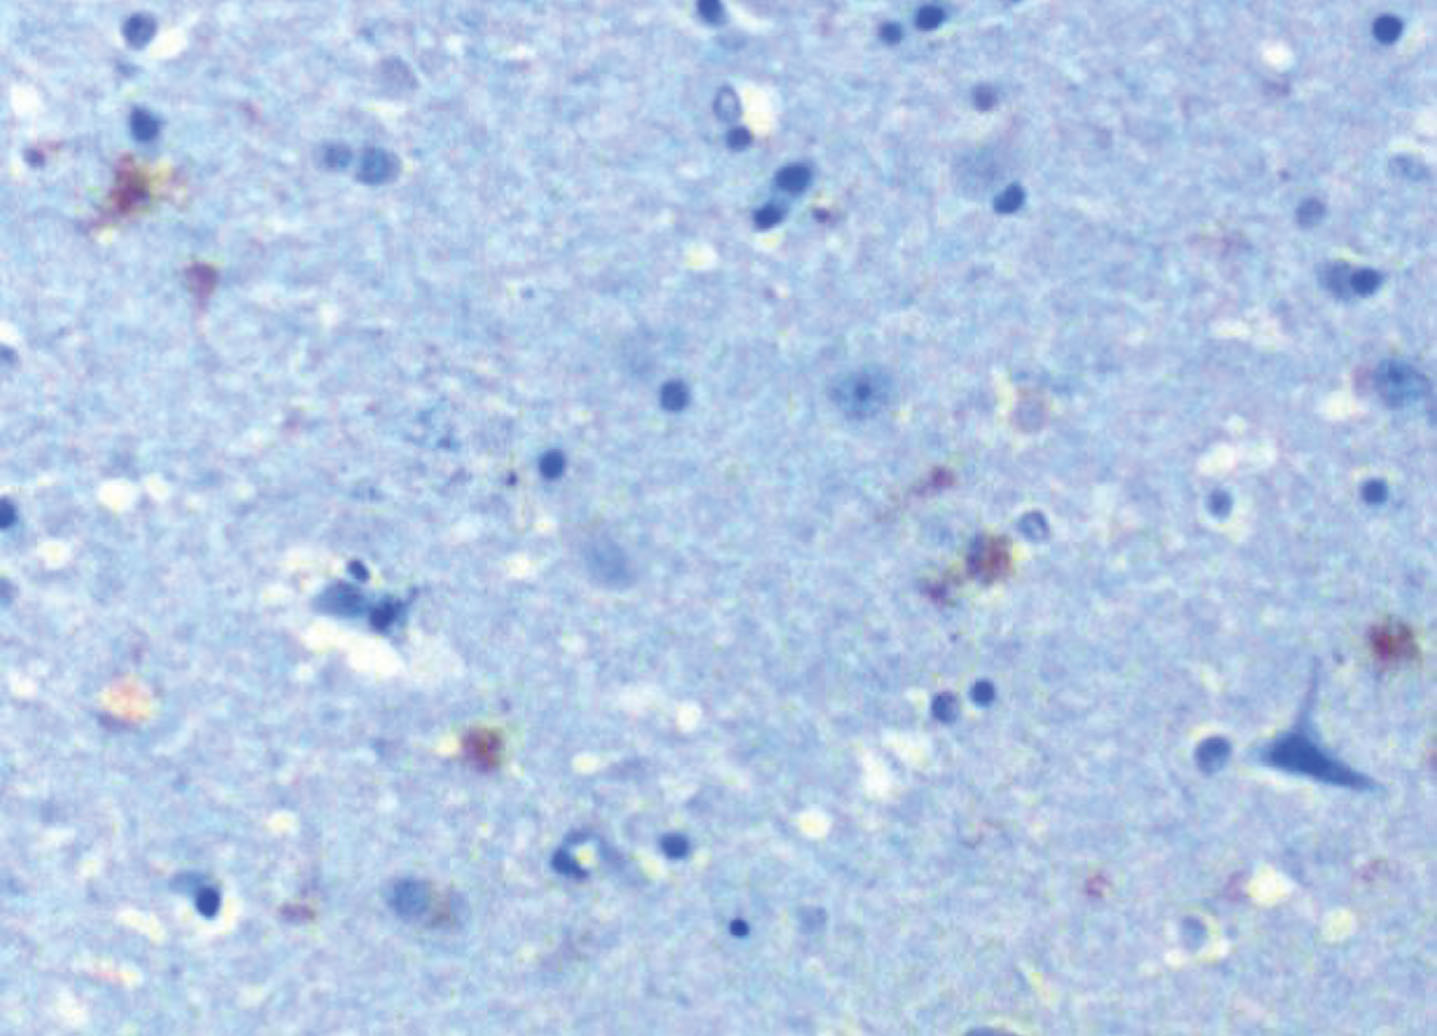 TLR 2 in hippocampus of AD patient. TLR 2 (CD 282) stains brown (represents activation) 10X. From Allen et al. [8].